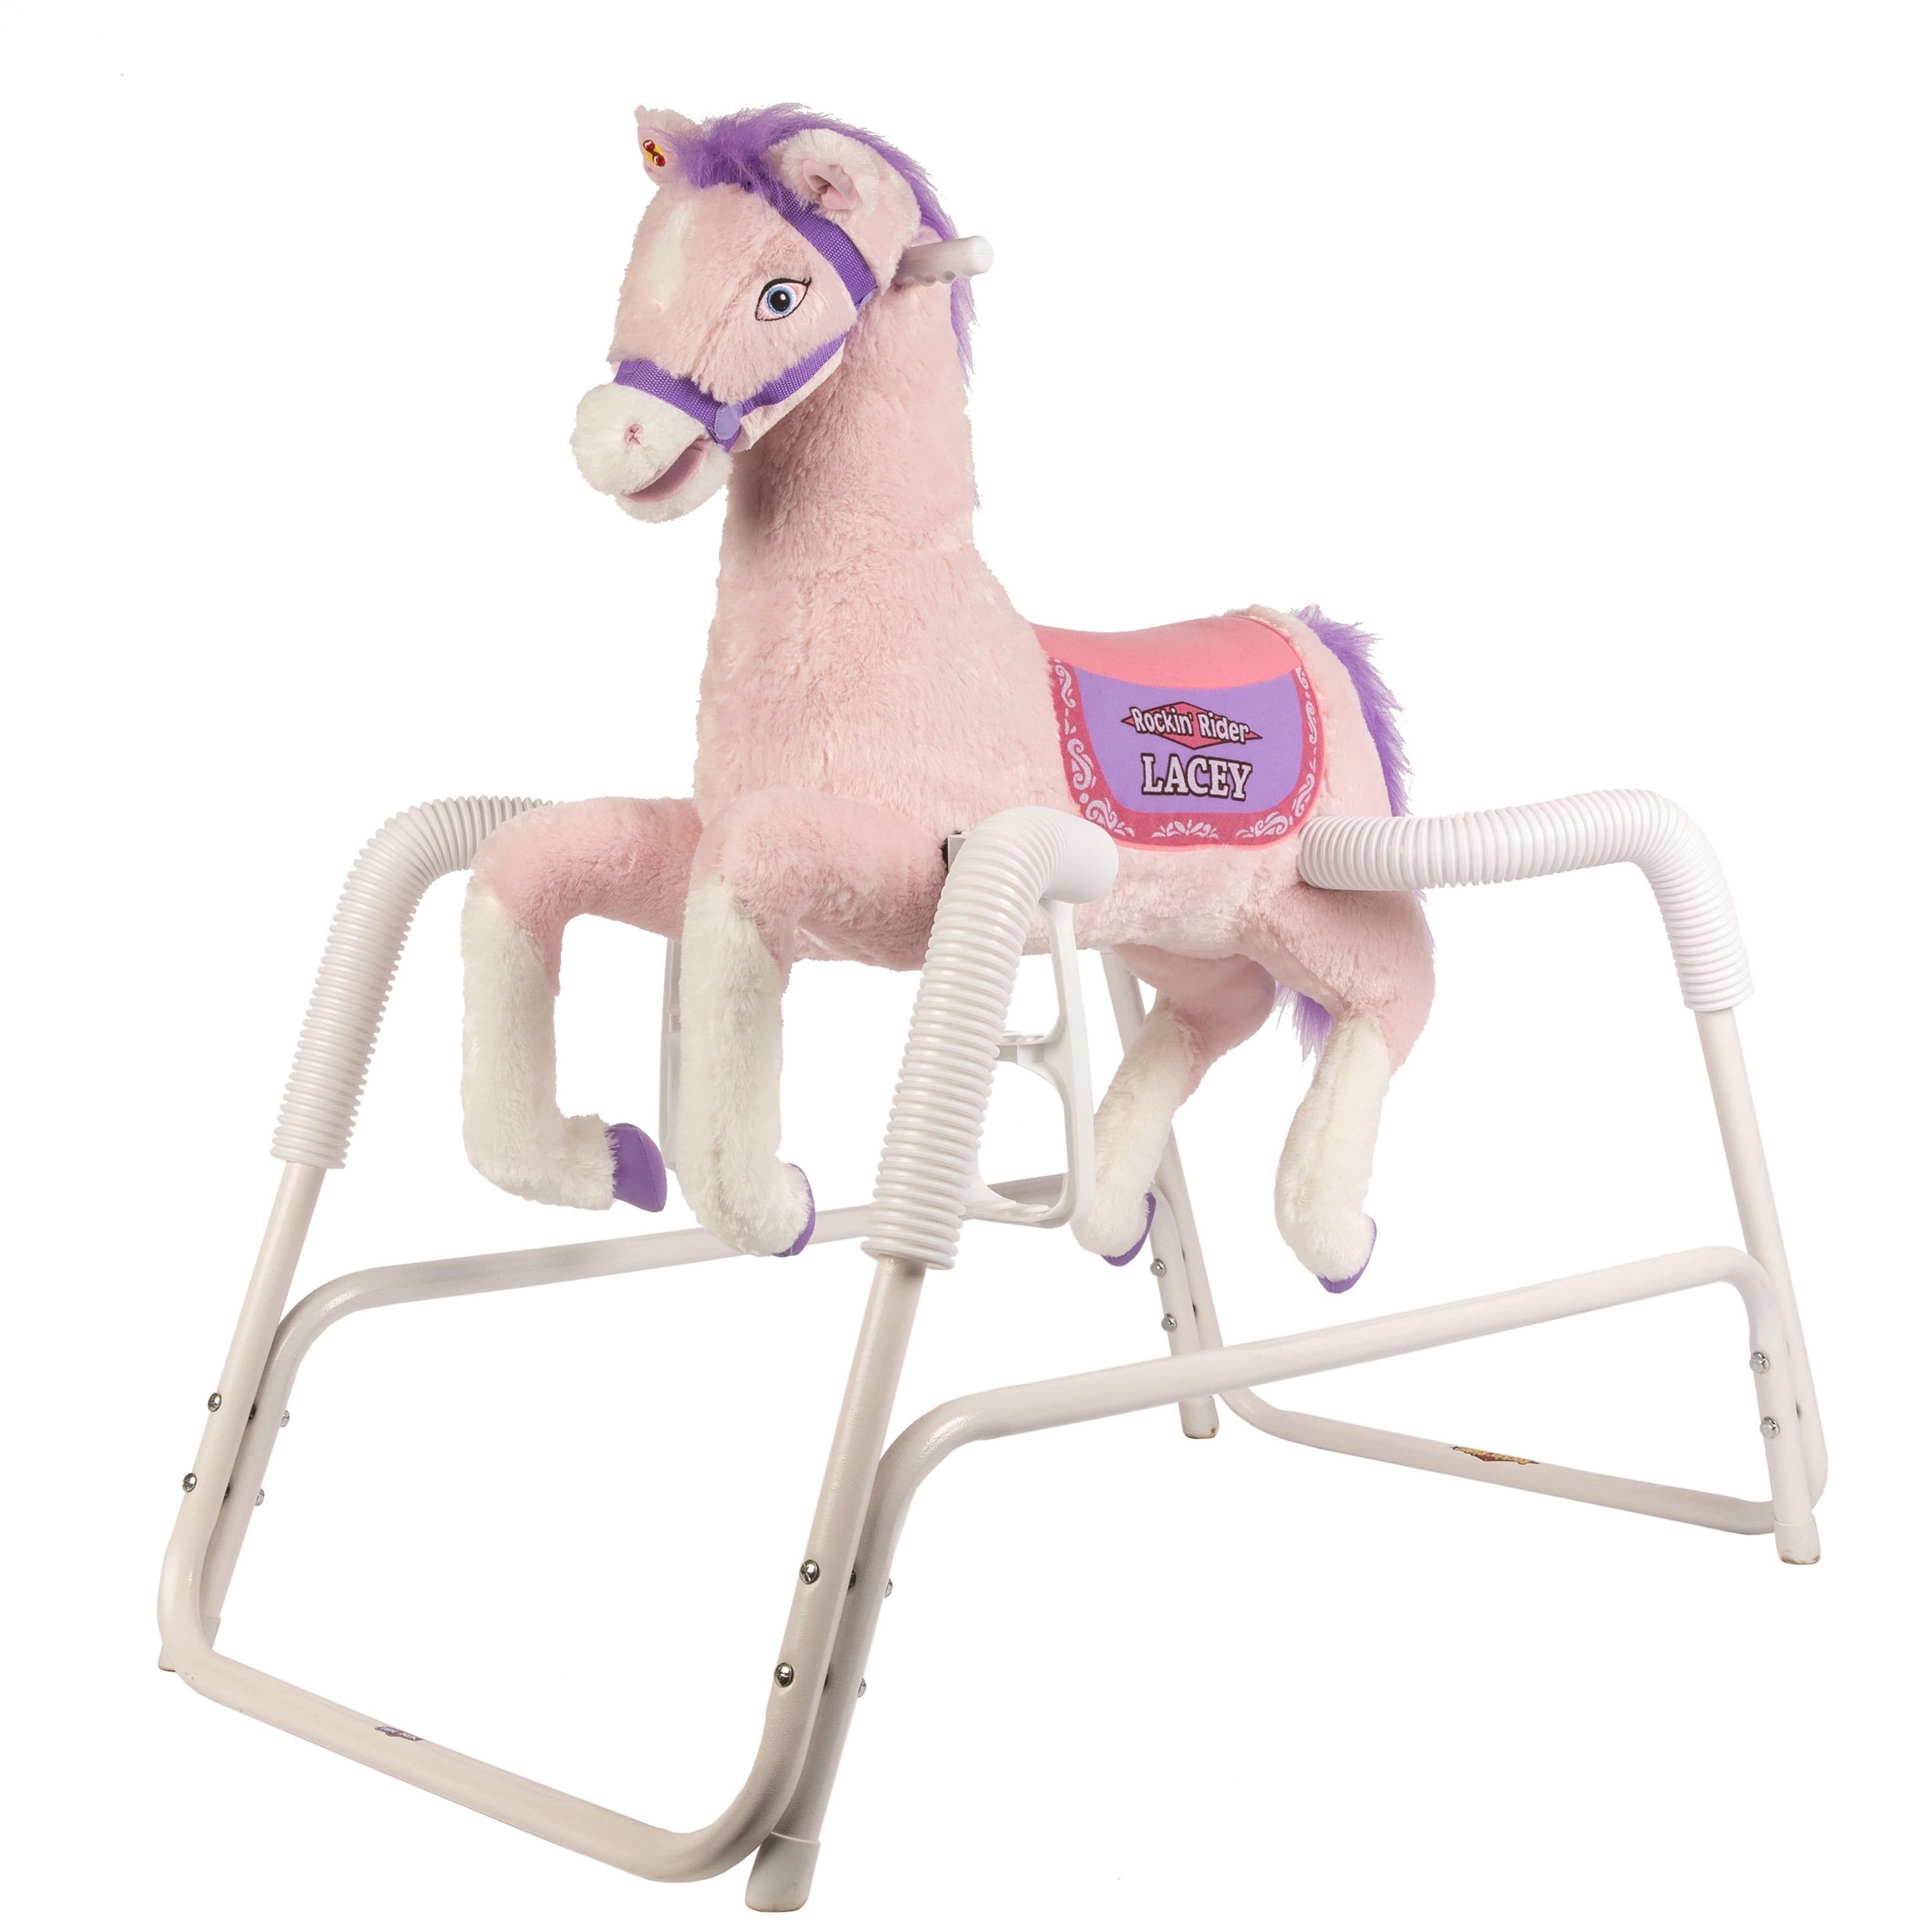 Rockin' Rider Legacy Grow with Me Pony Ride-On Rocker Bouncer Convertible to S 